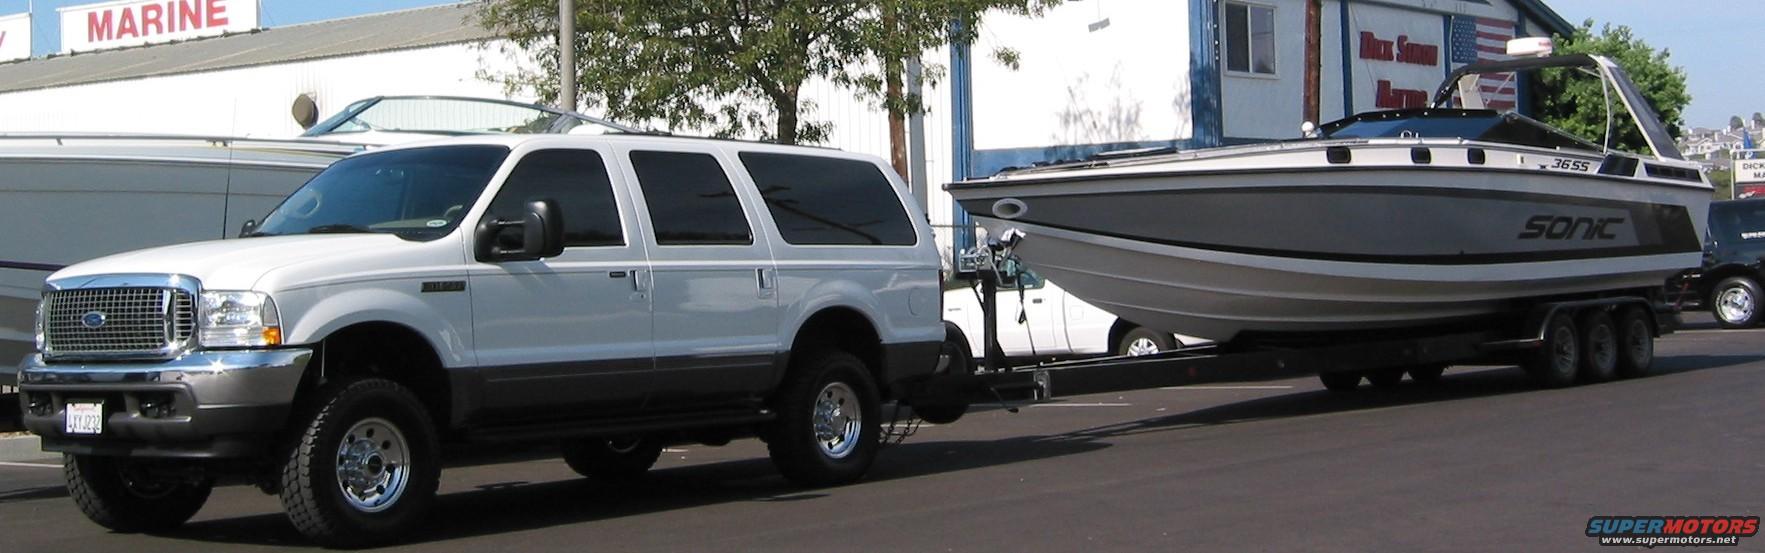 2002 Ford excursion v10 towing capacity #1